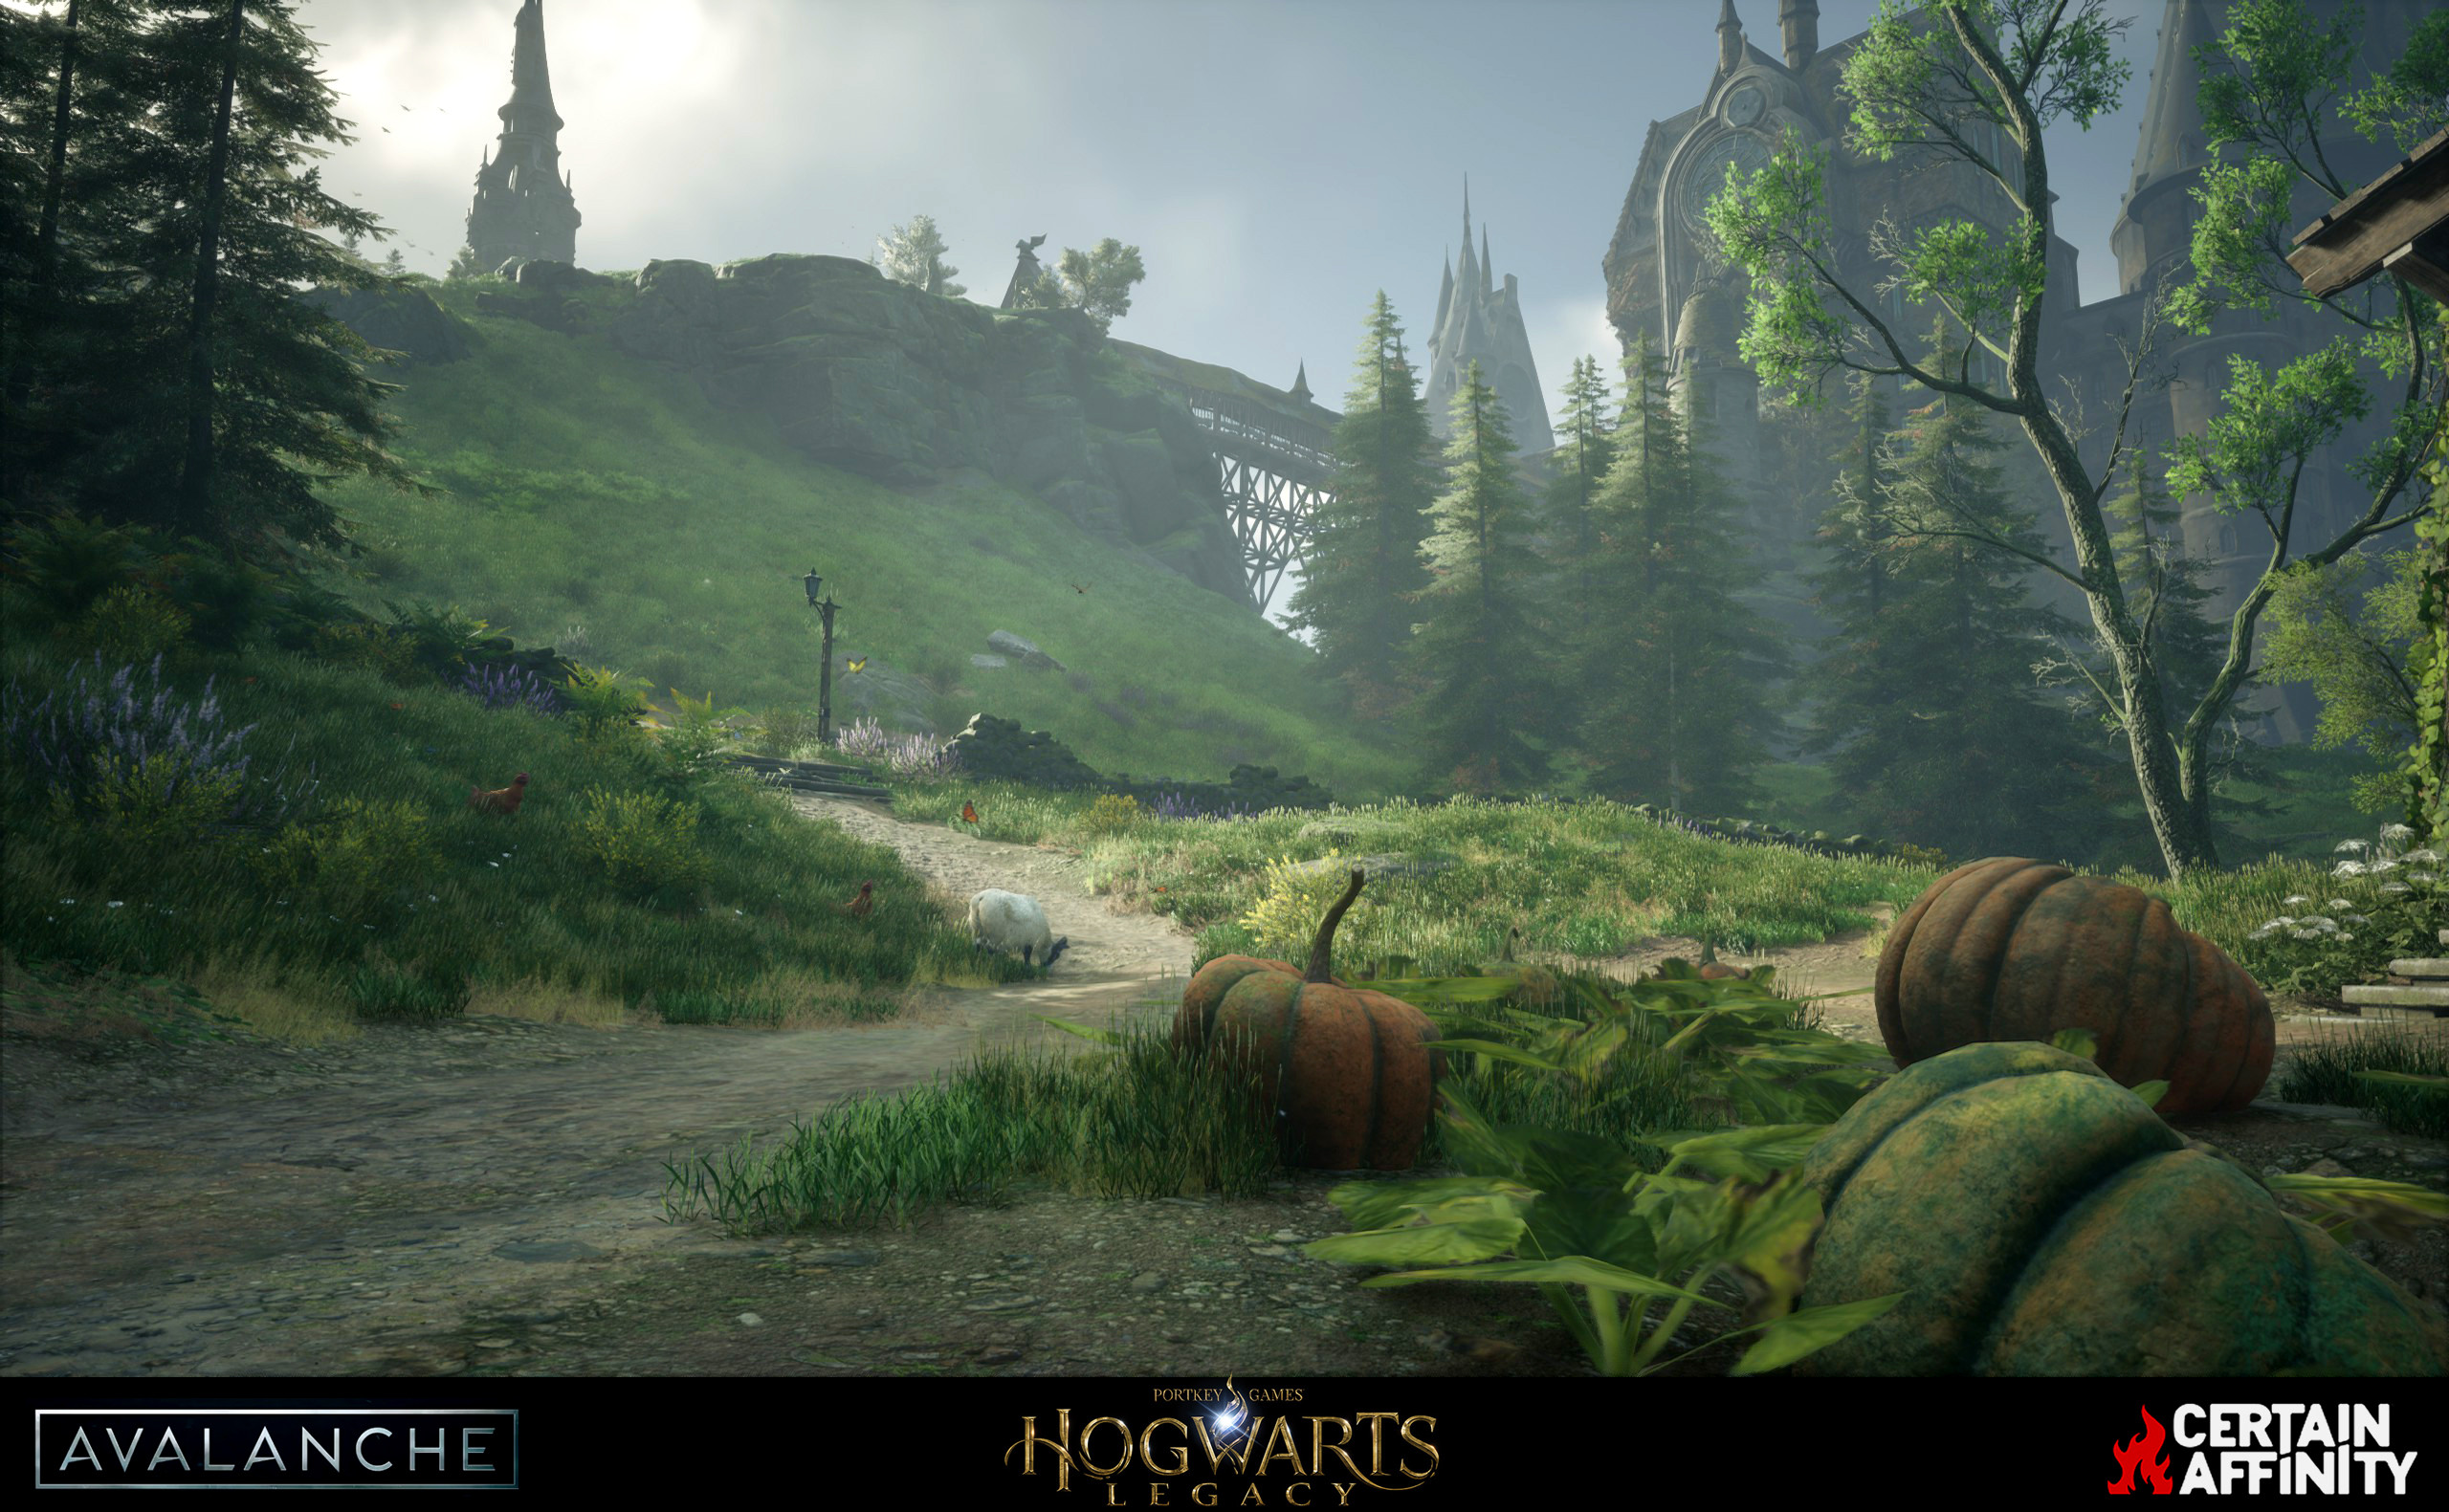 I worked on the terrain painting/sculpting, foliage placement, and set dressing across the Lower Hogsfield mountainside and paths